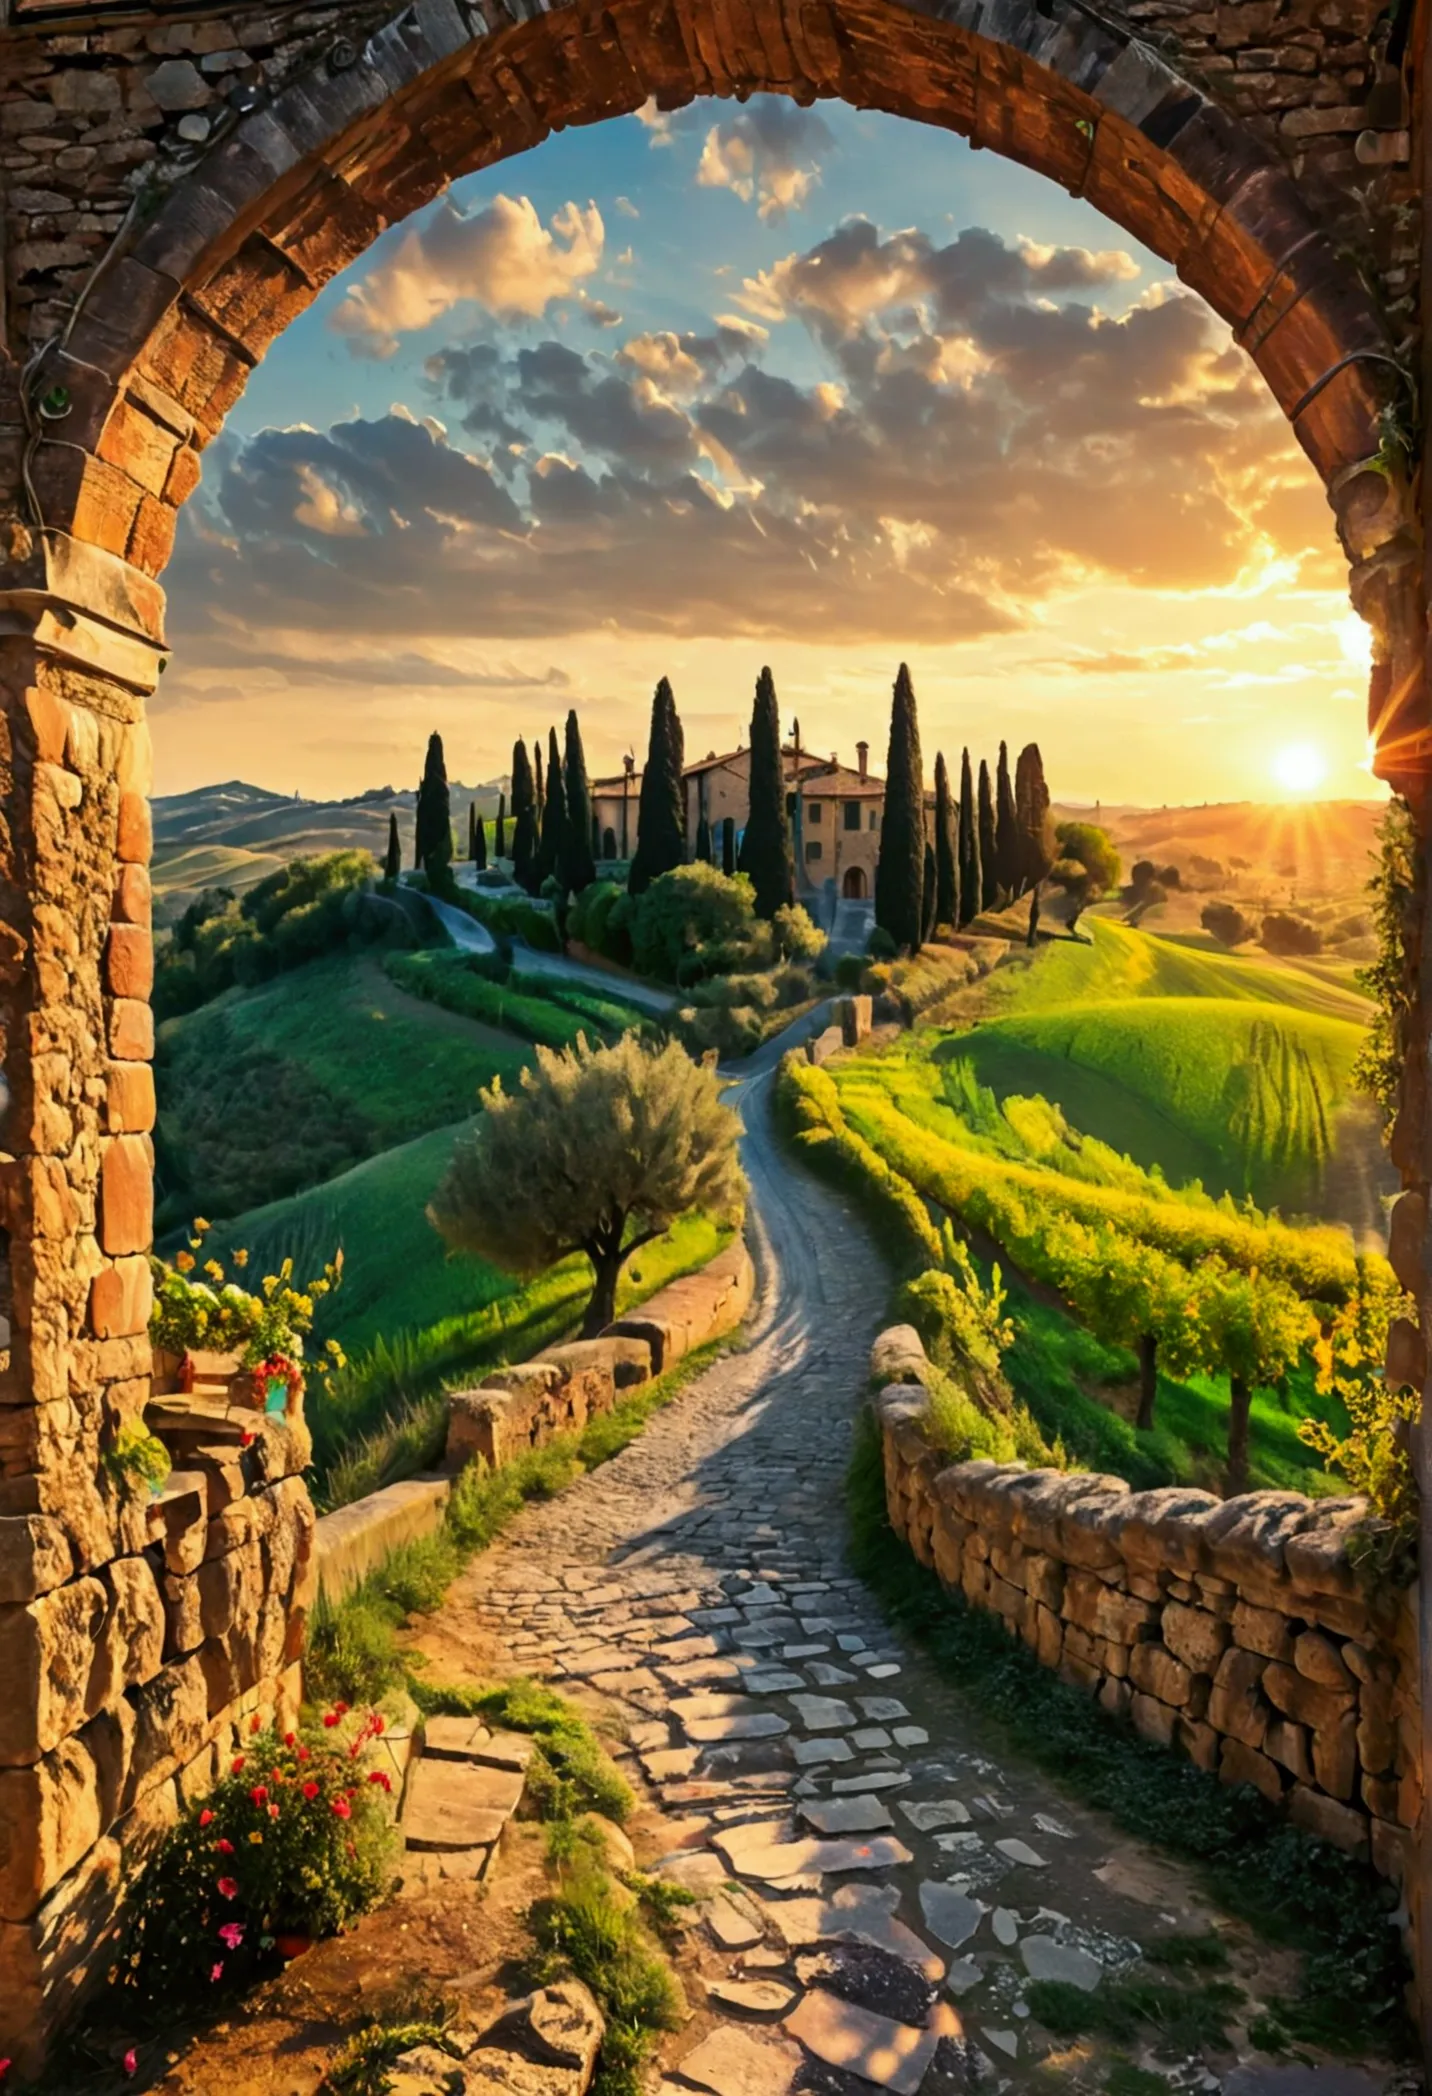 coloring book, best tourist landscape scene in tuscany, italy